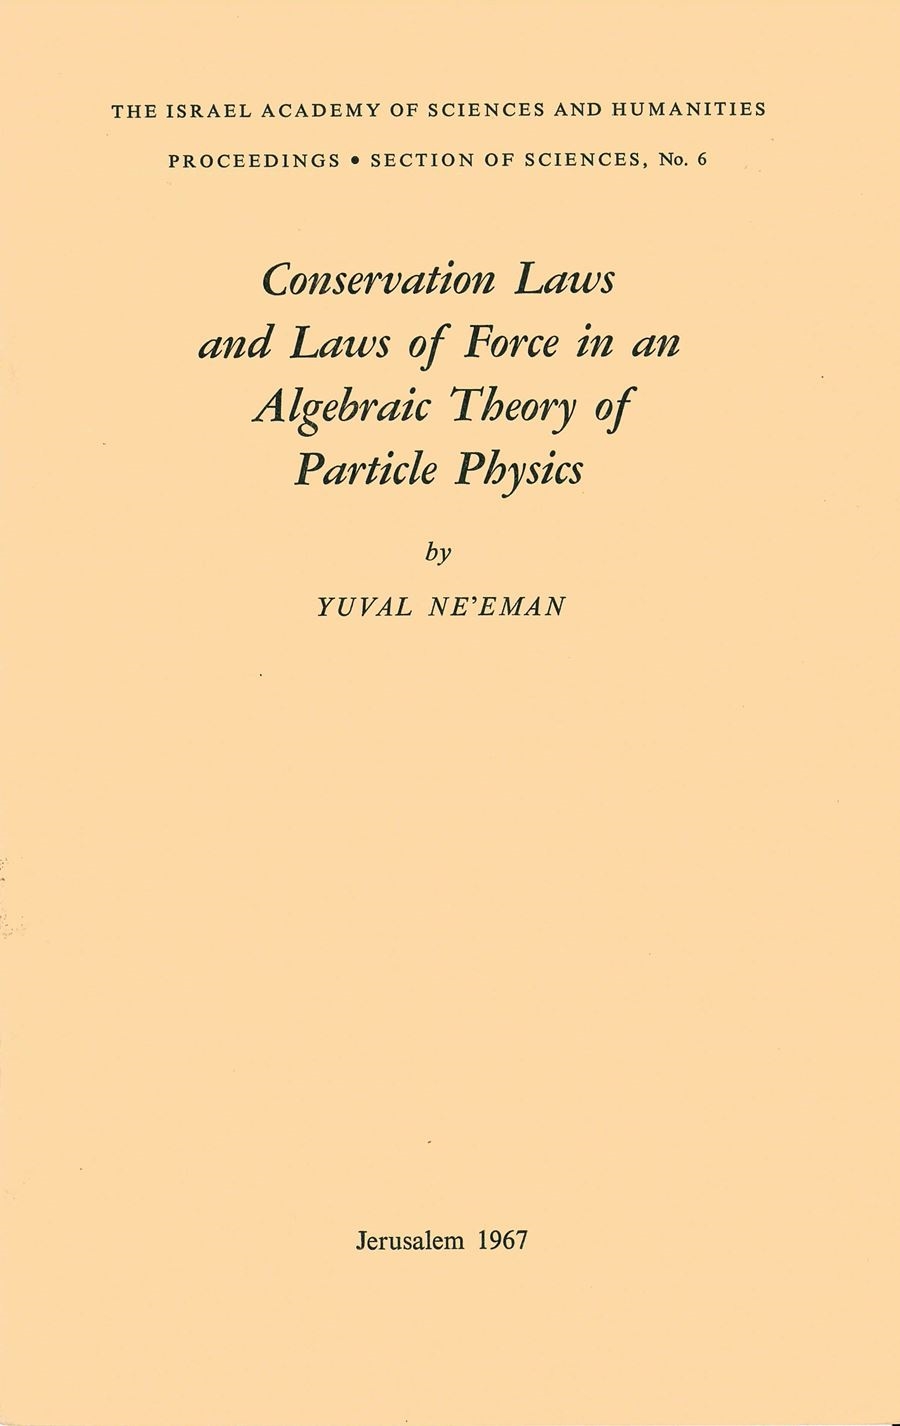 Conservation Laws and Laws of Force in an Algebraic Theory of Particle Physics